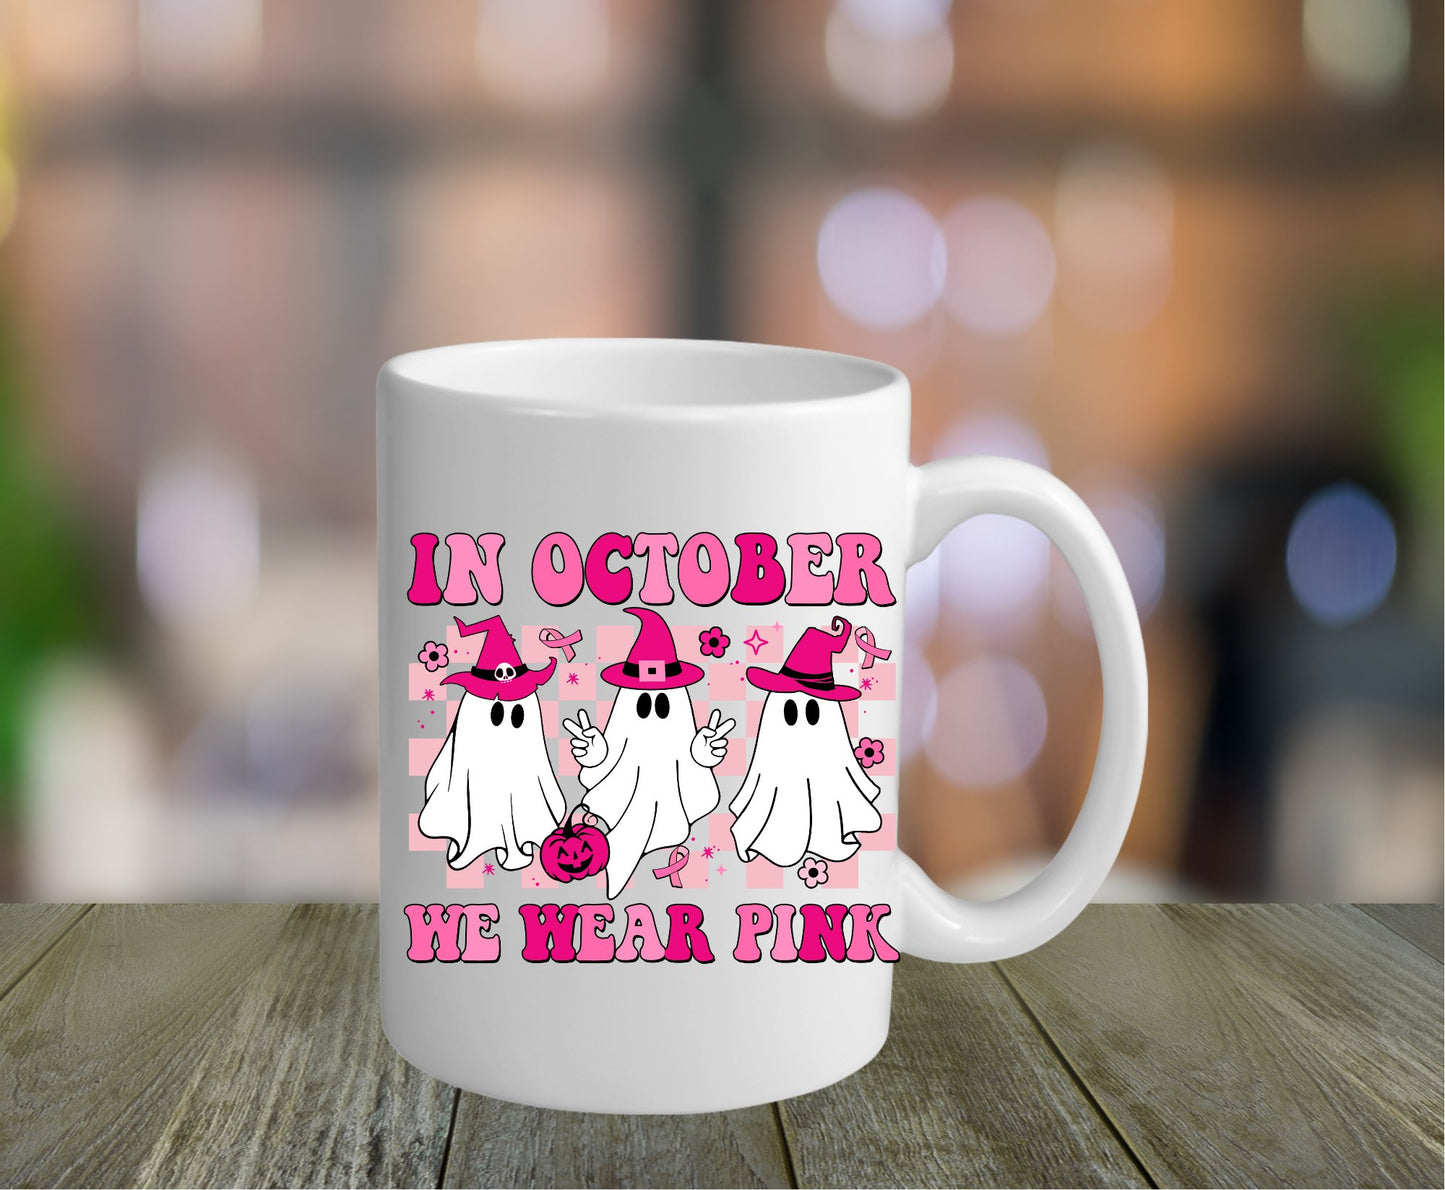 Ghost with Pink hats mug - Saints Place Designs